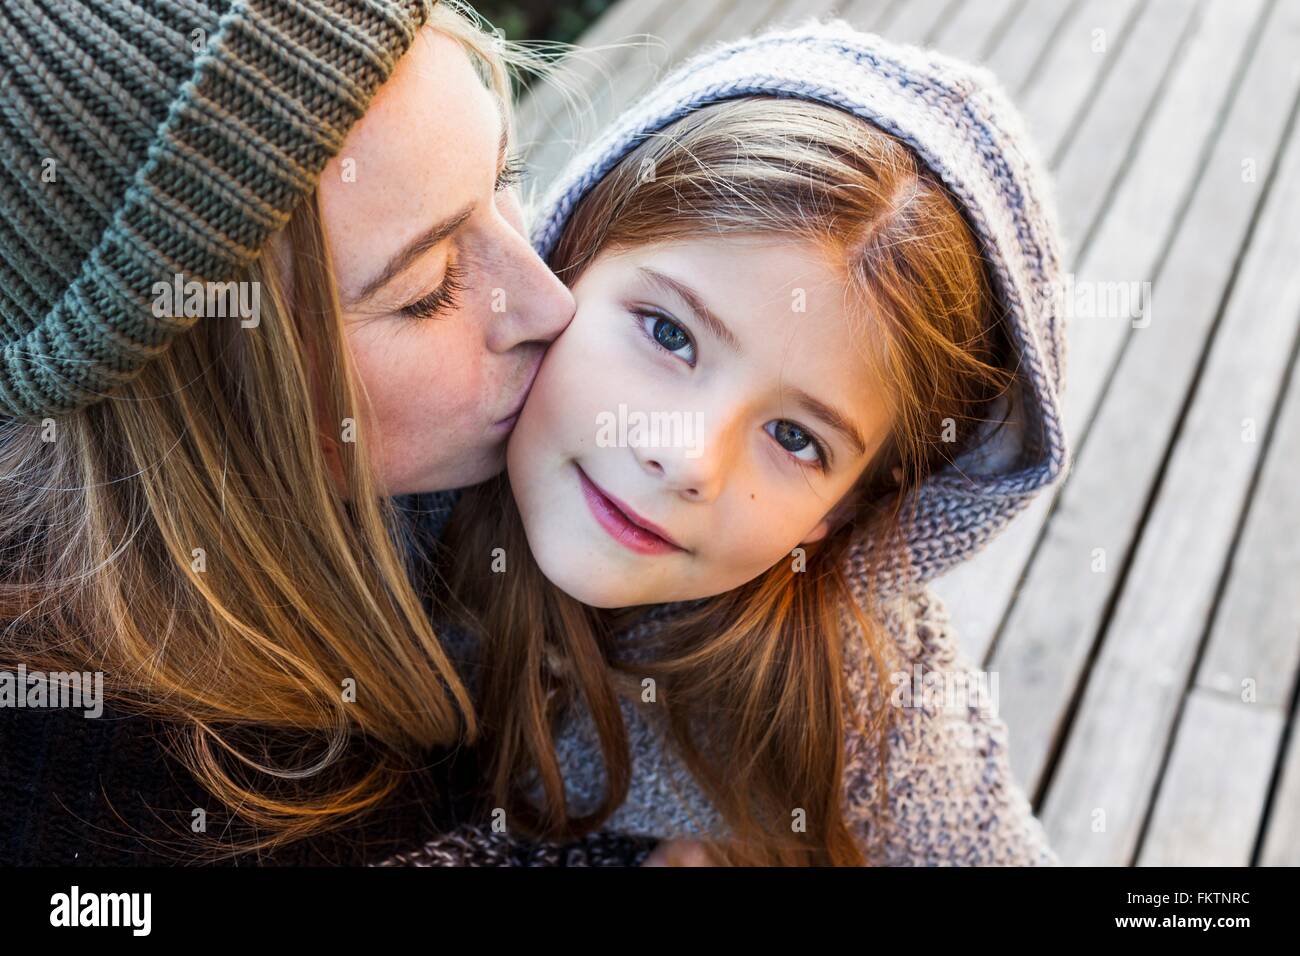 Mother kissing daughter on cheek, high angle portrait Stock Photo